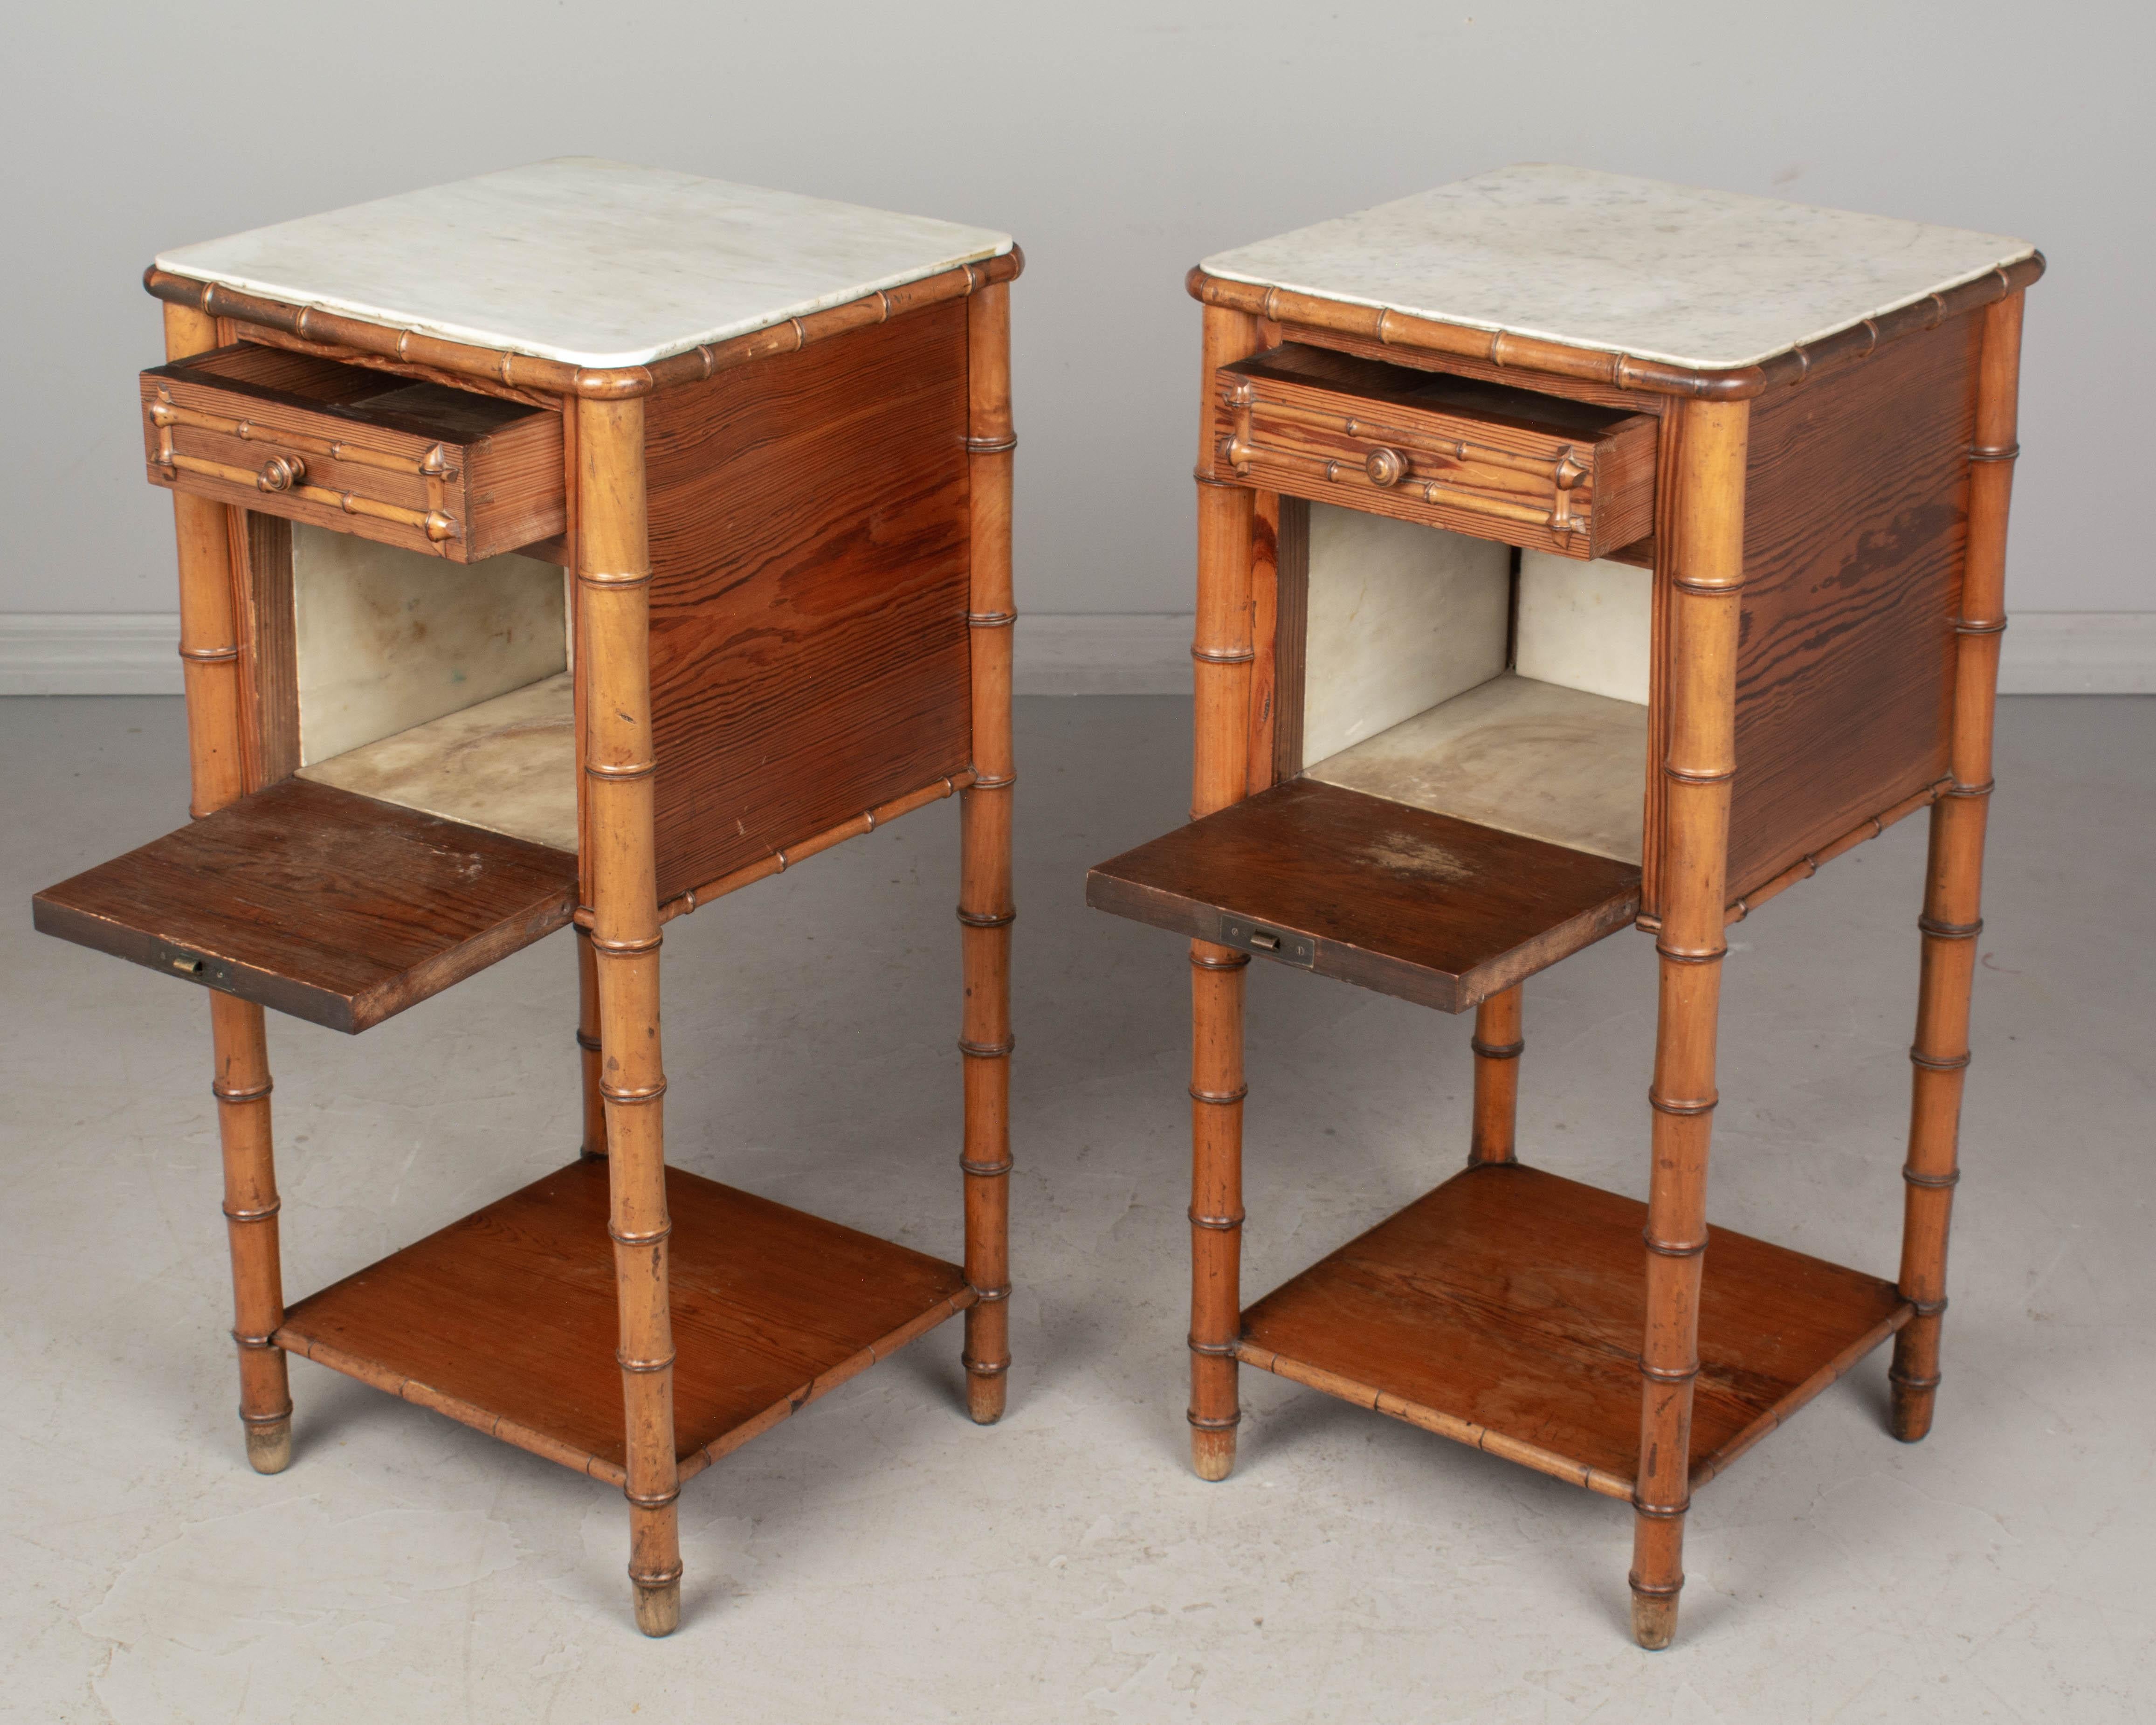 French Provincial 19th Century French Faux Bamboo Side Tables, a Pair